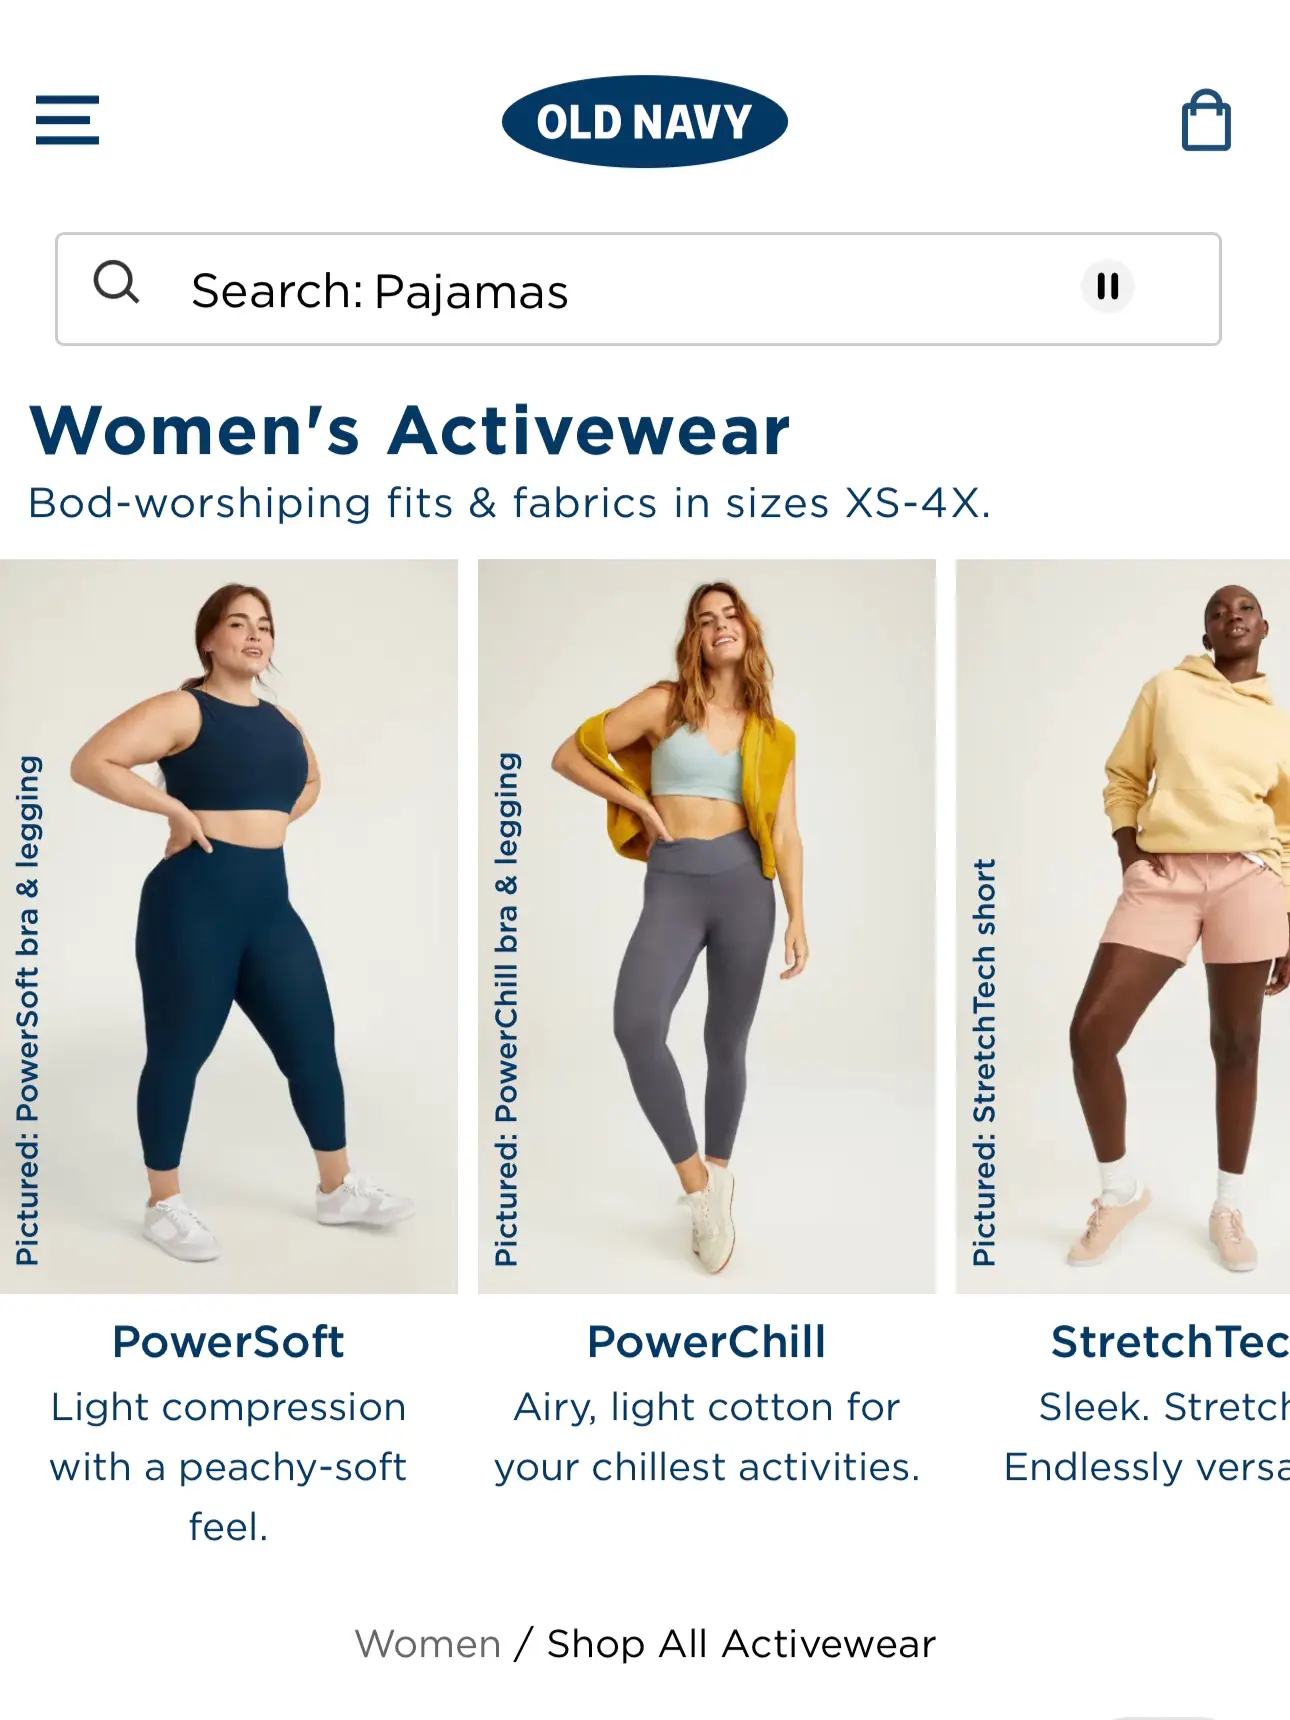 Current favs of activewear & WHY!